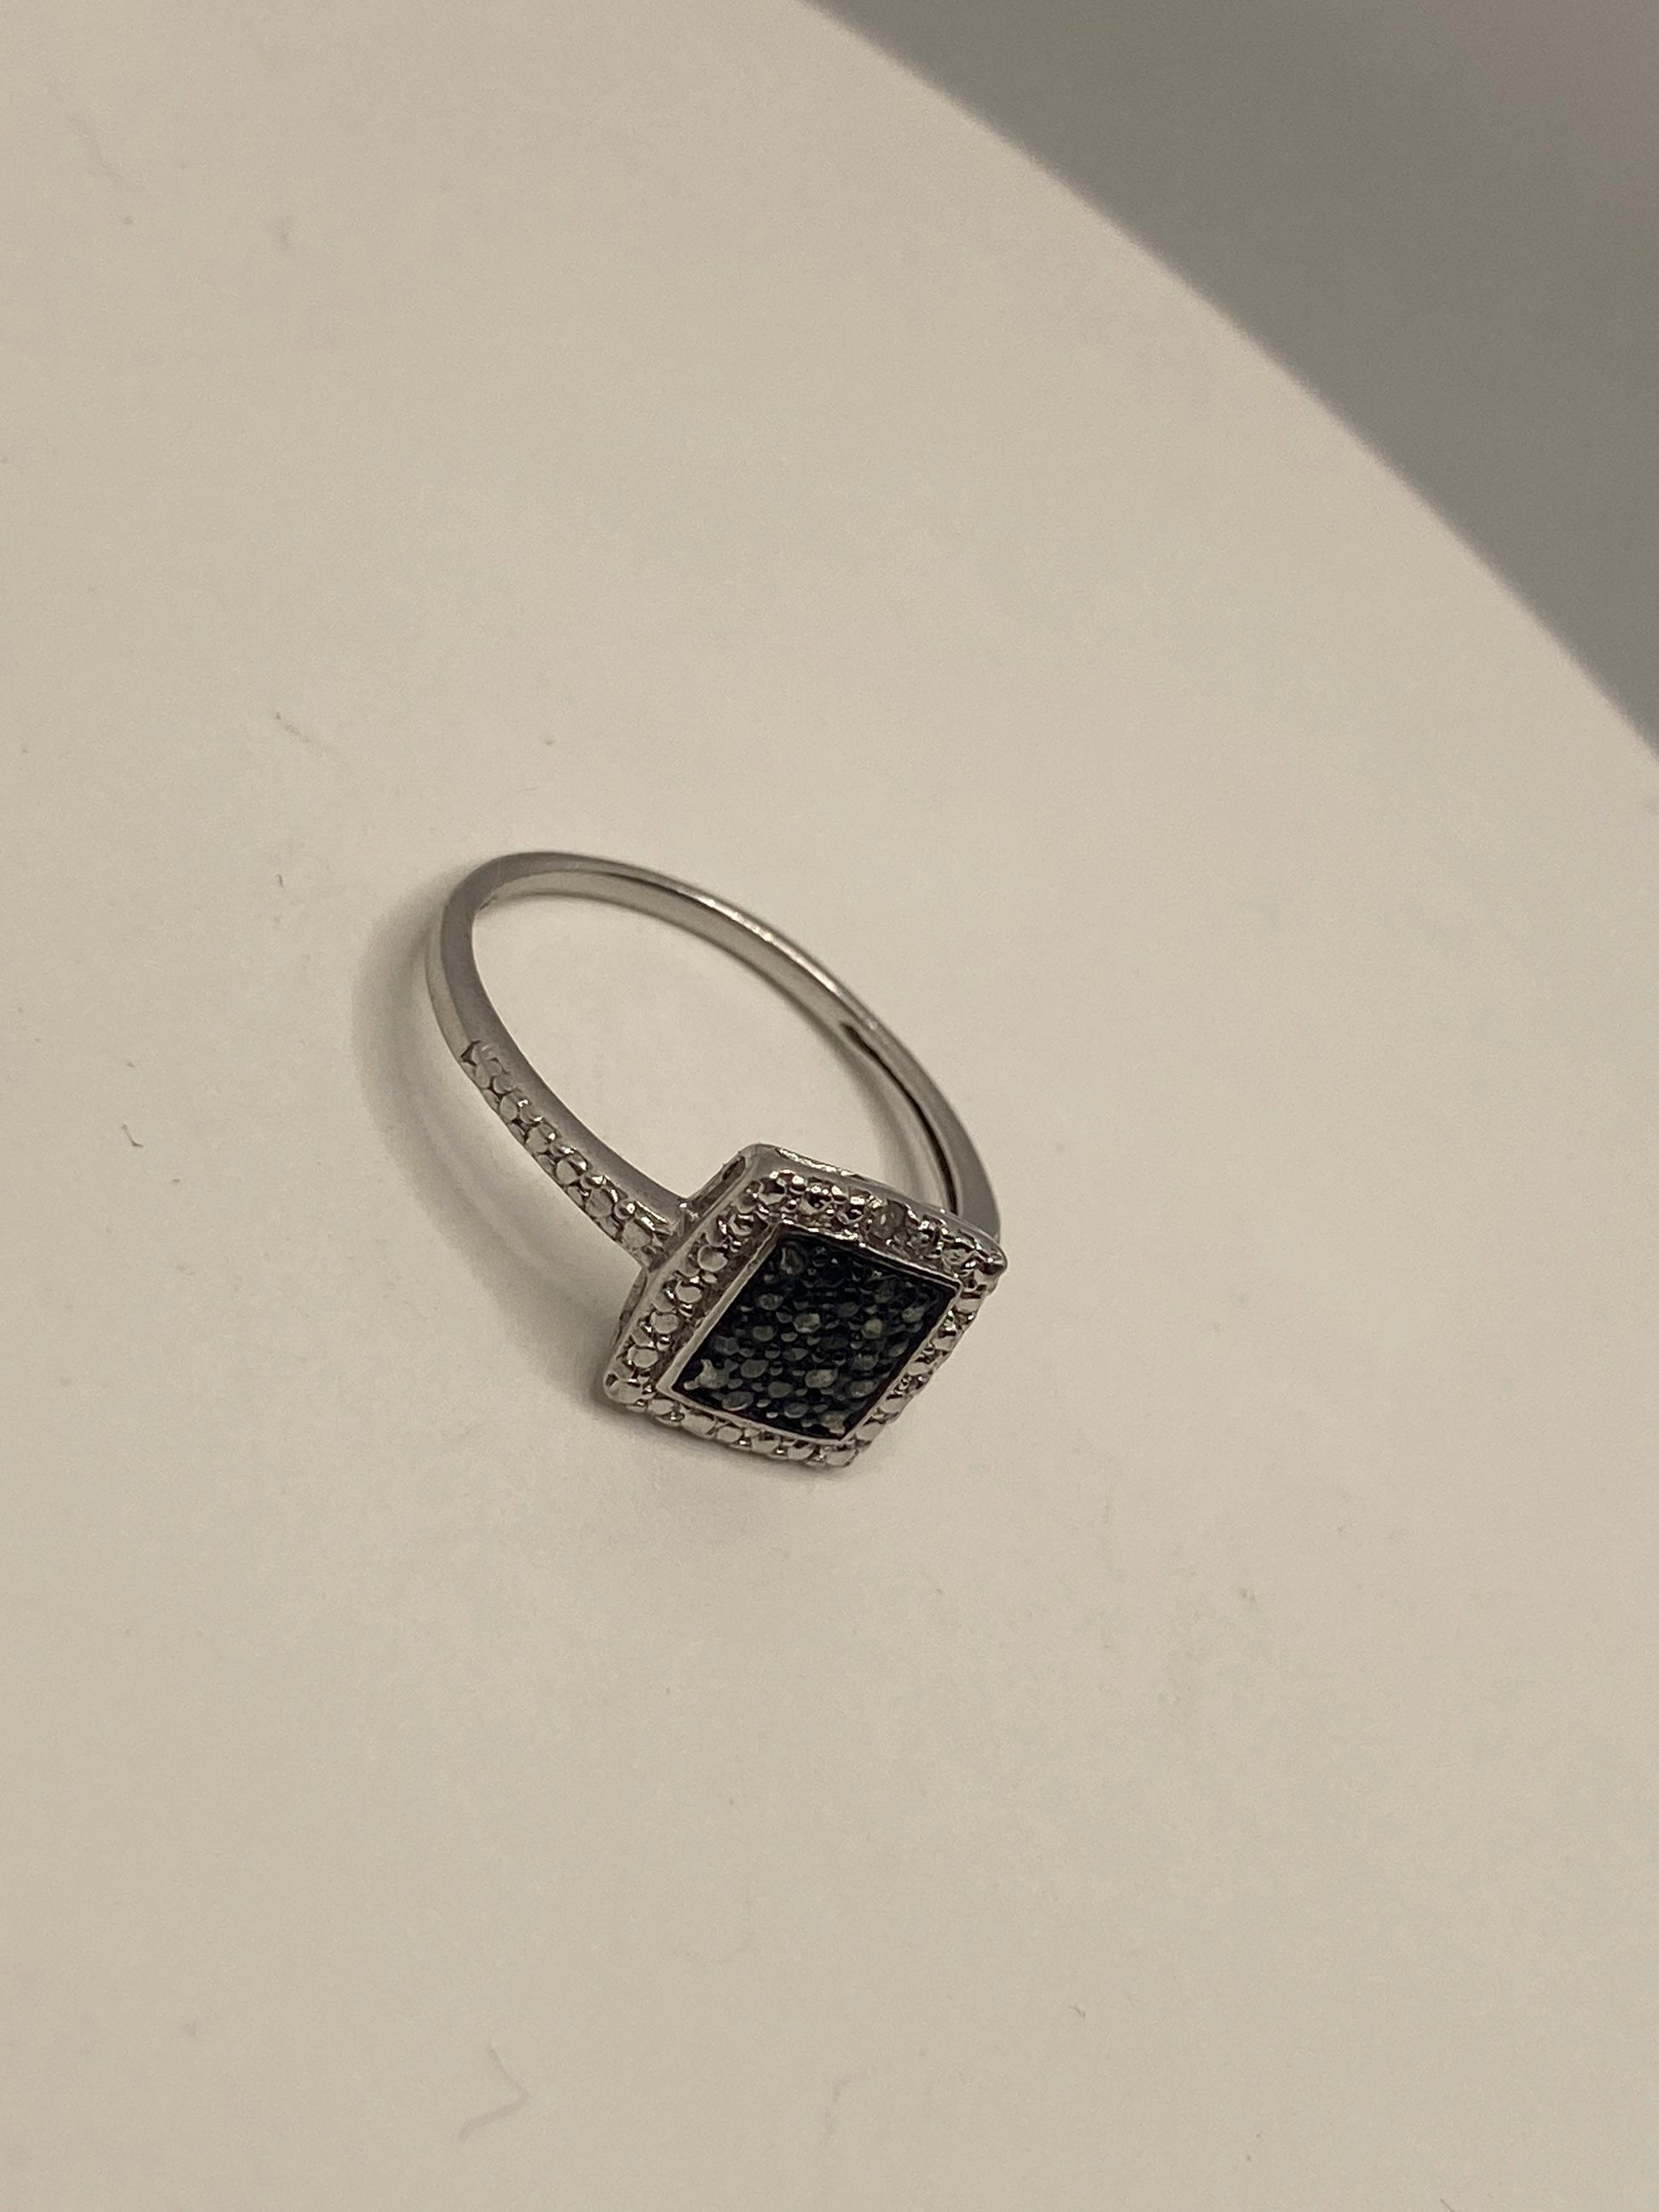 Vintage Black and White Diamond 925 Sterling Silver Wedding Band Ring